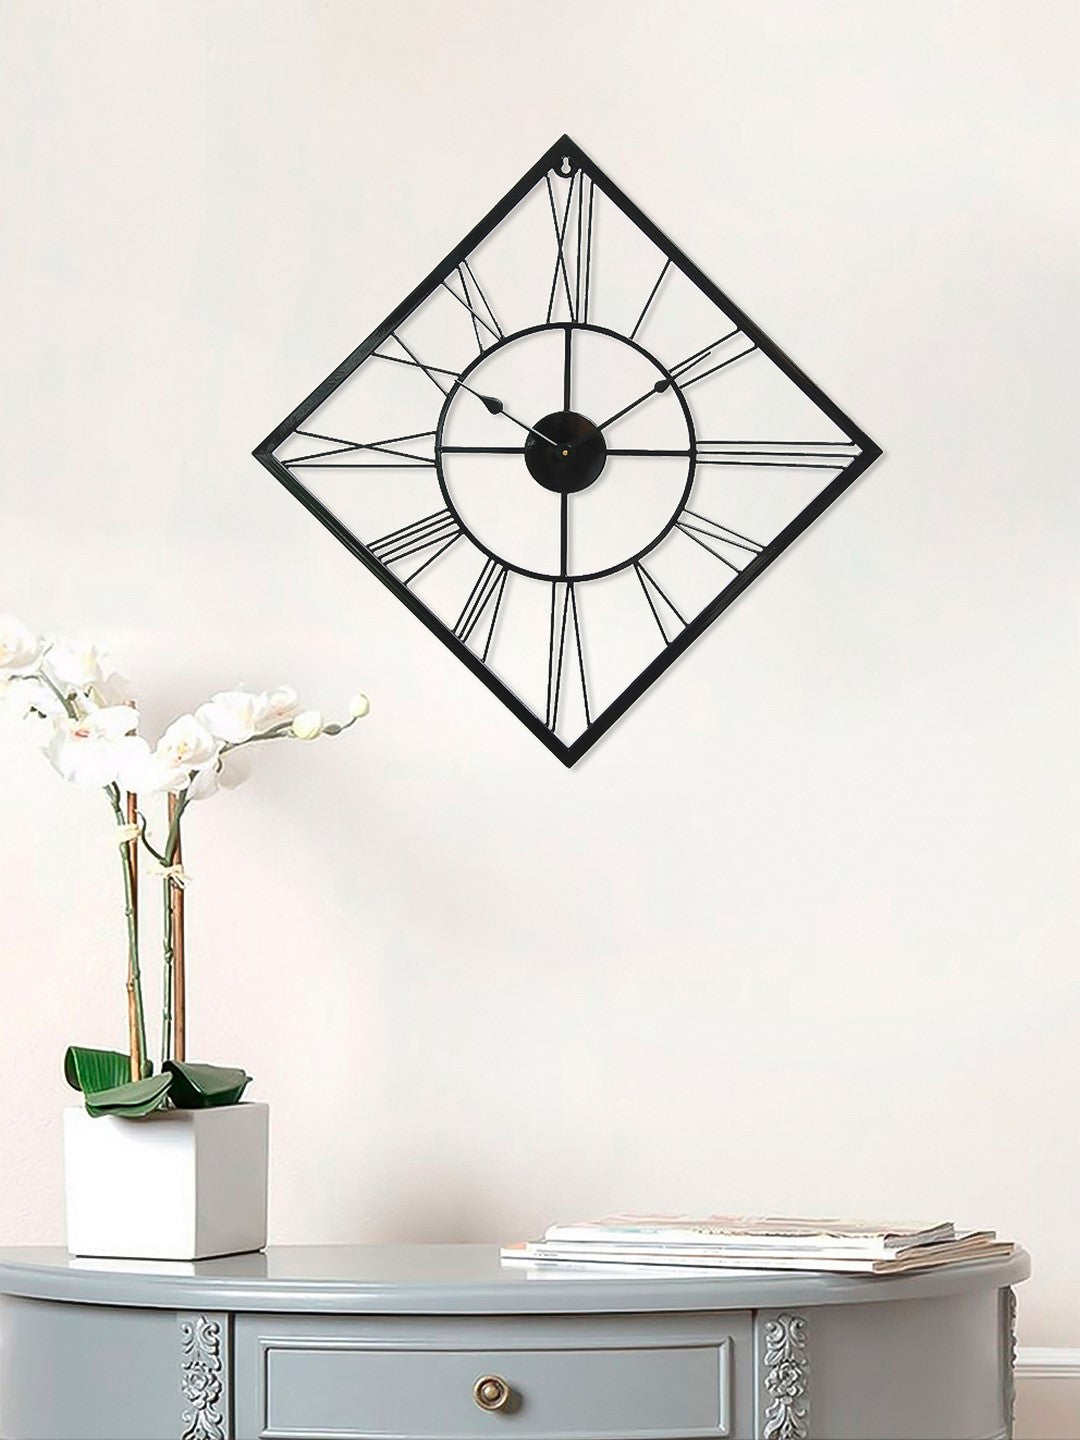 Black Iron Kite Shape Handcrafted Analog Roman Number Wall Clock Without Glass 1